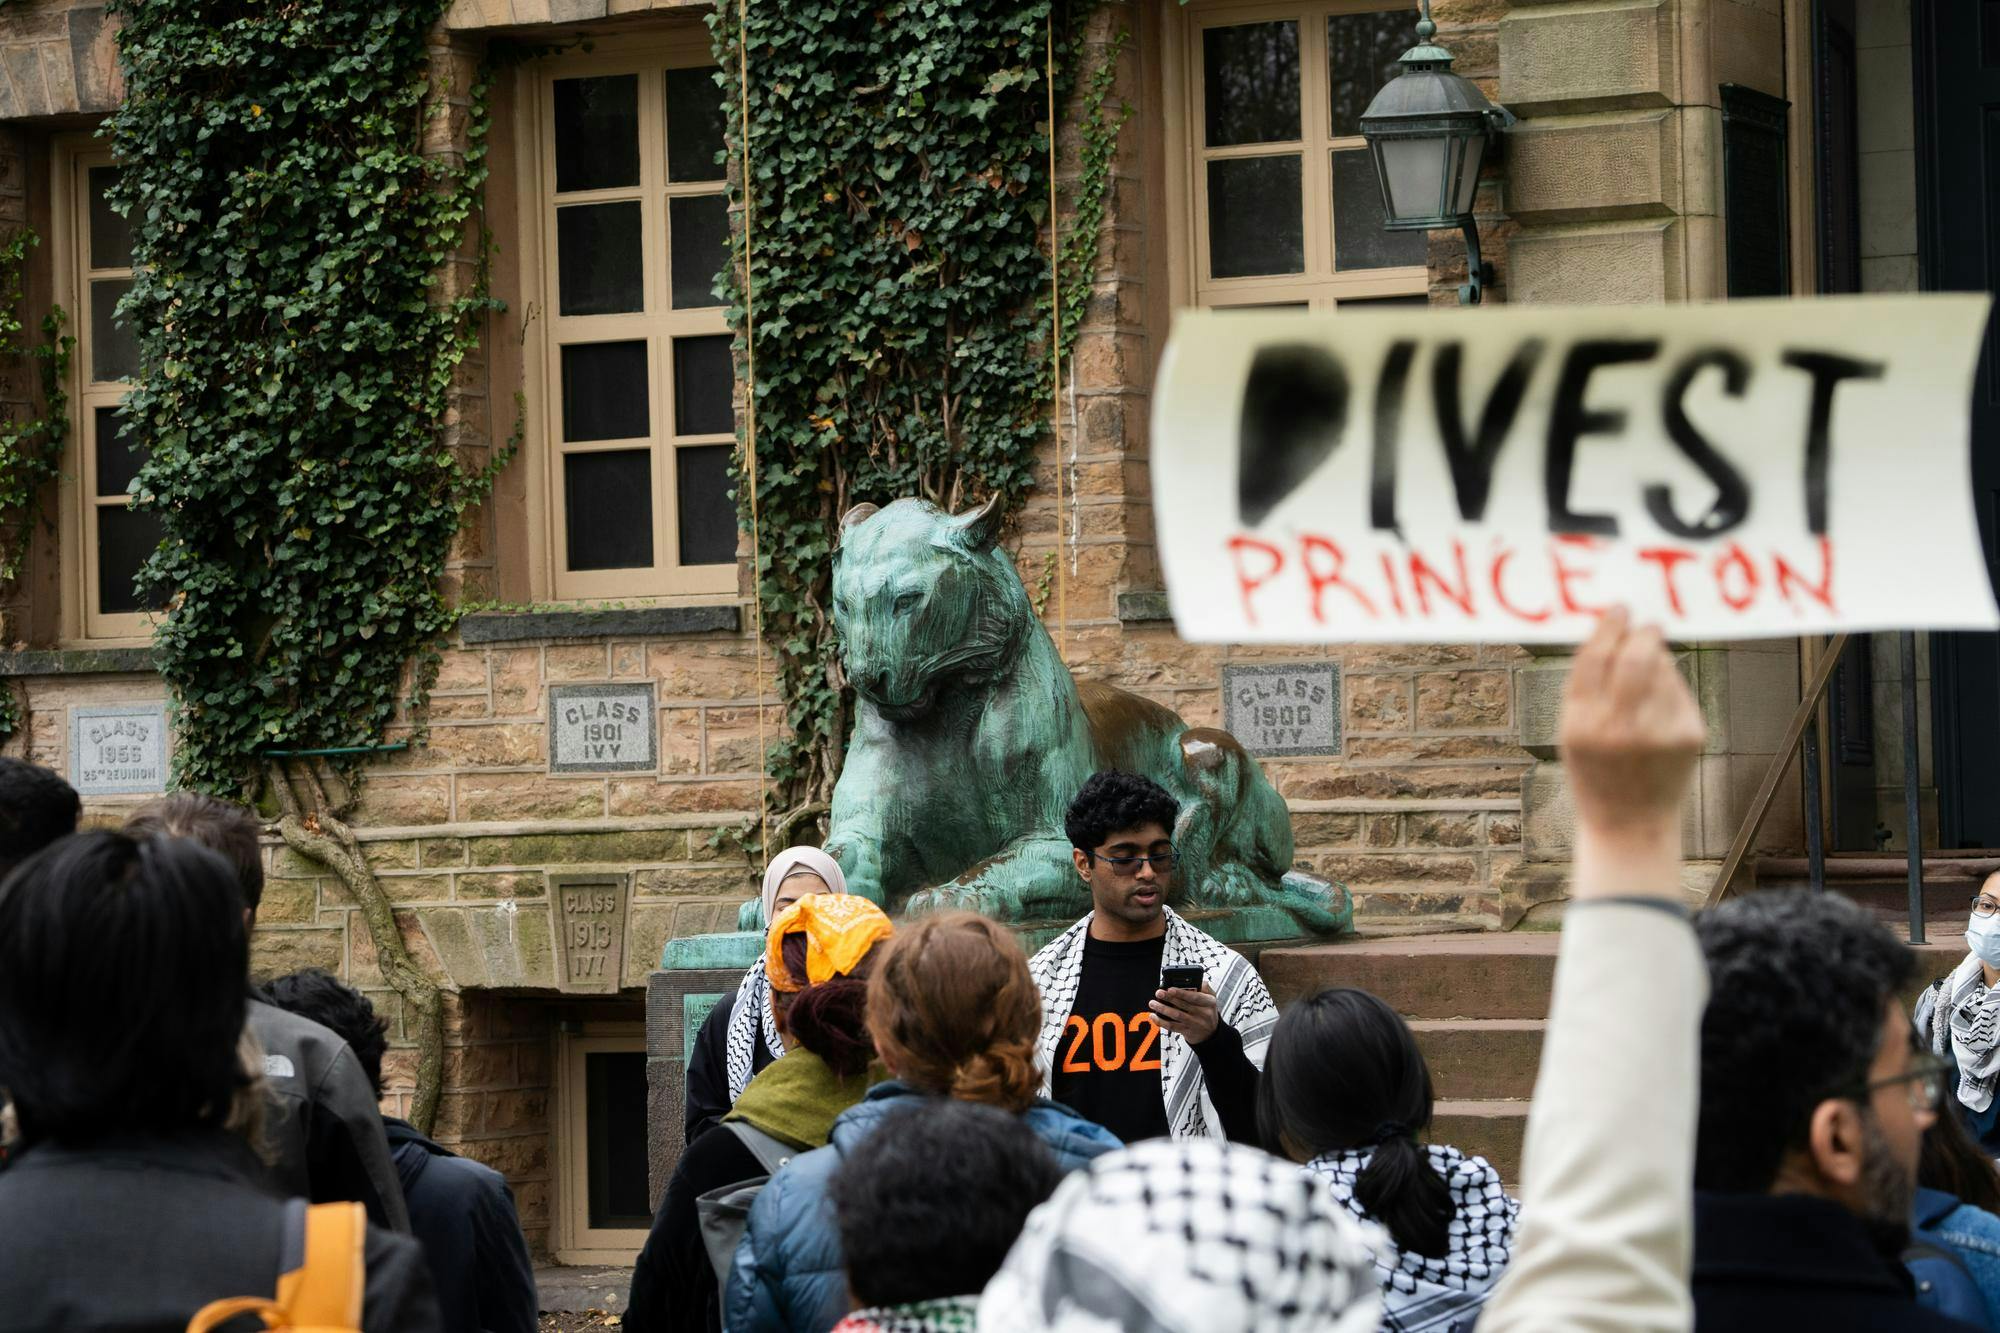 A man wearing dark glasses and a white keffiyeh over a black and orange sweater that reads “2026” gives a speech in front of the steps of an ivy-covered building. In the foreground a sign reads “DIVEST PRINCETON.”